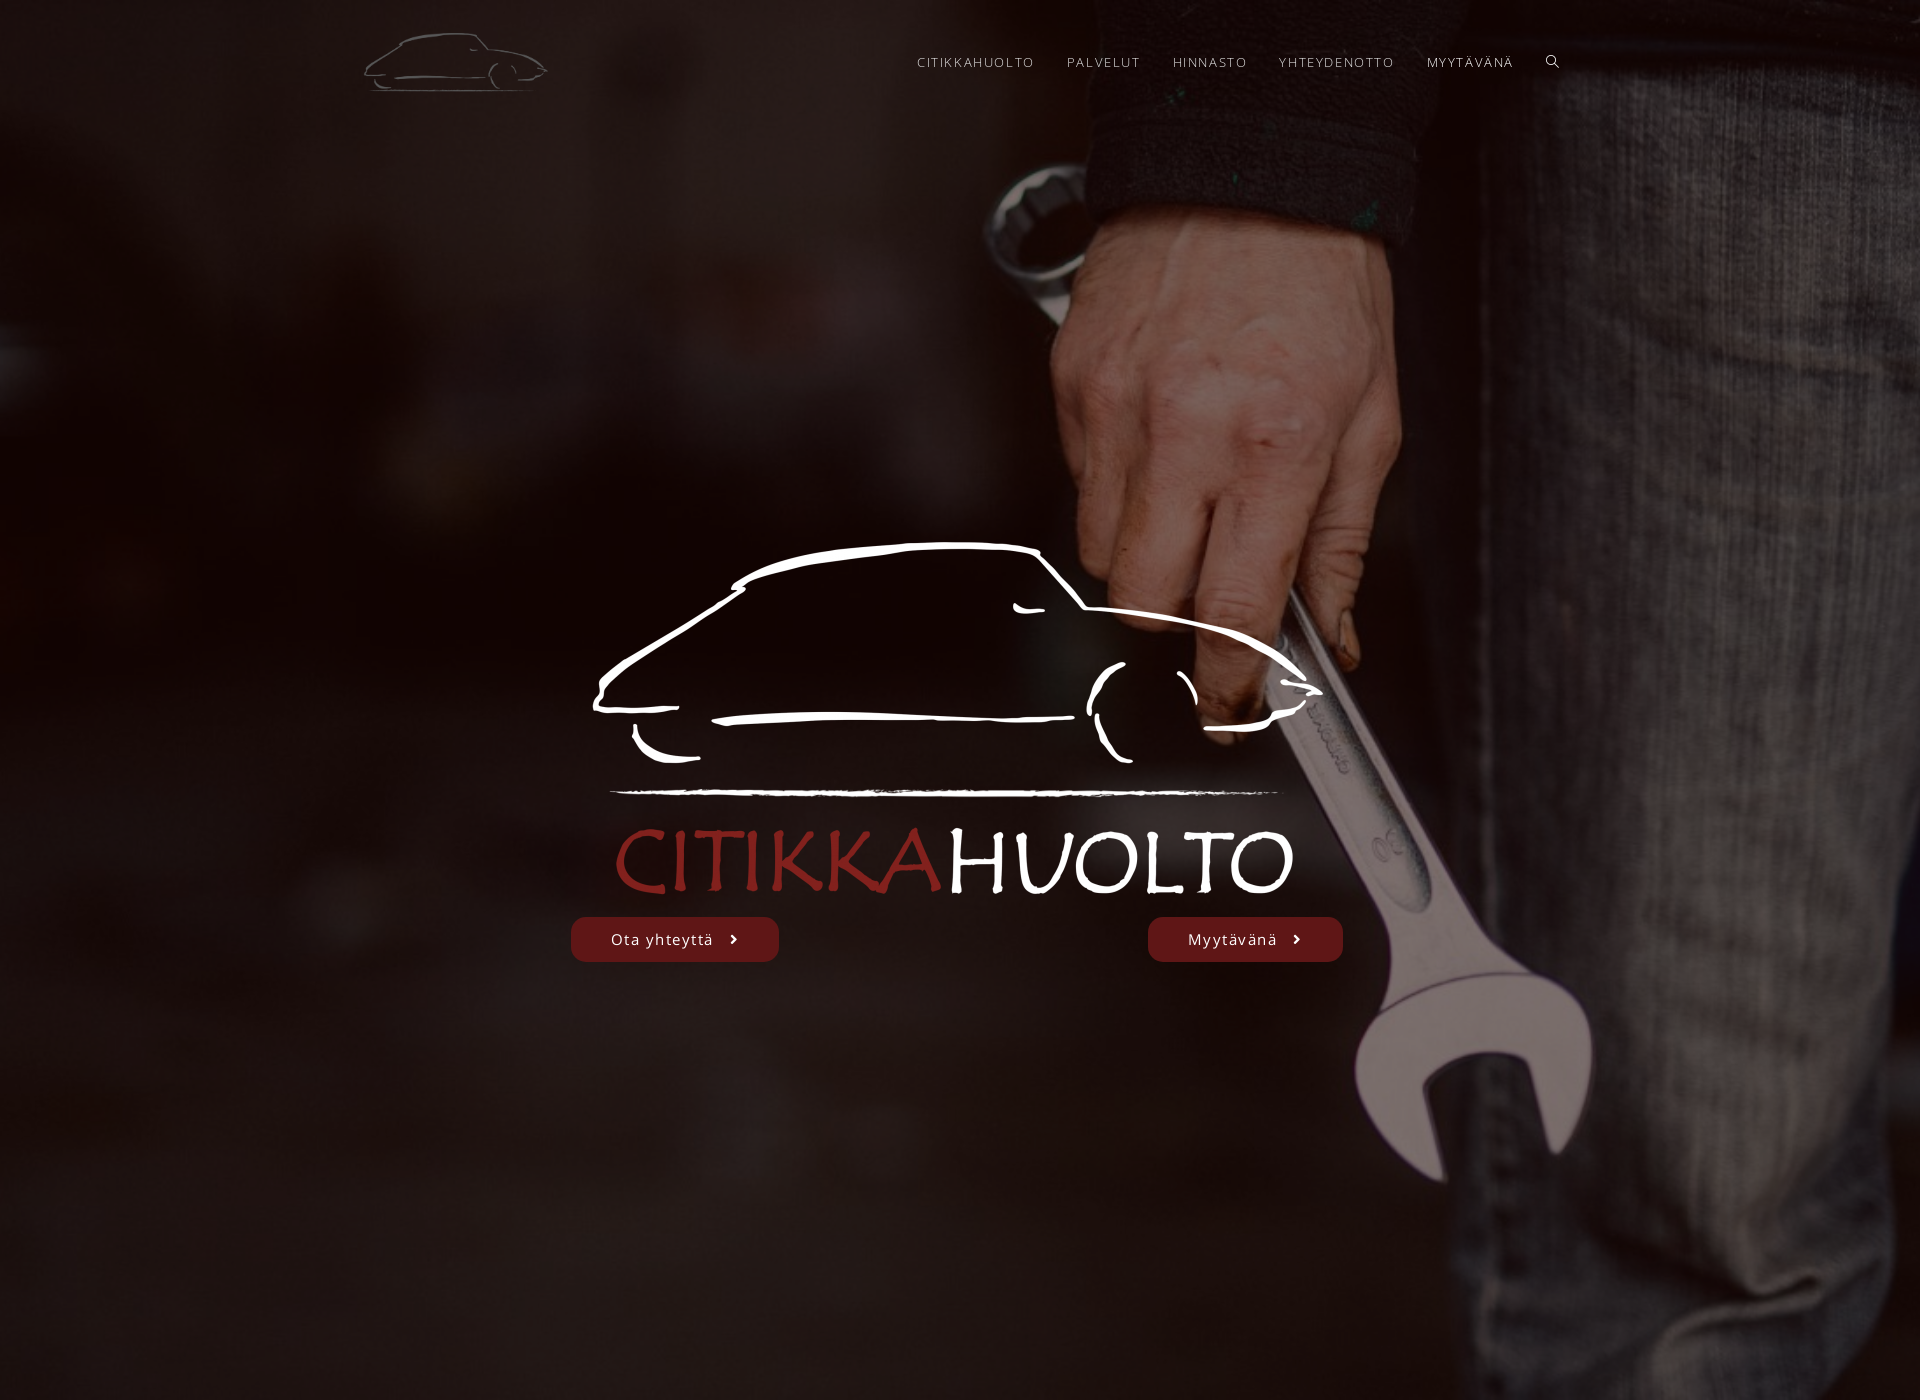 Screenshot for citikkahuolto.fi